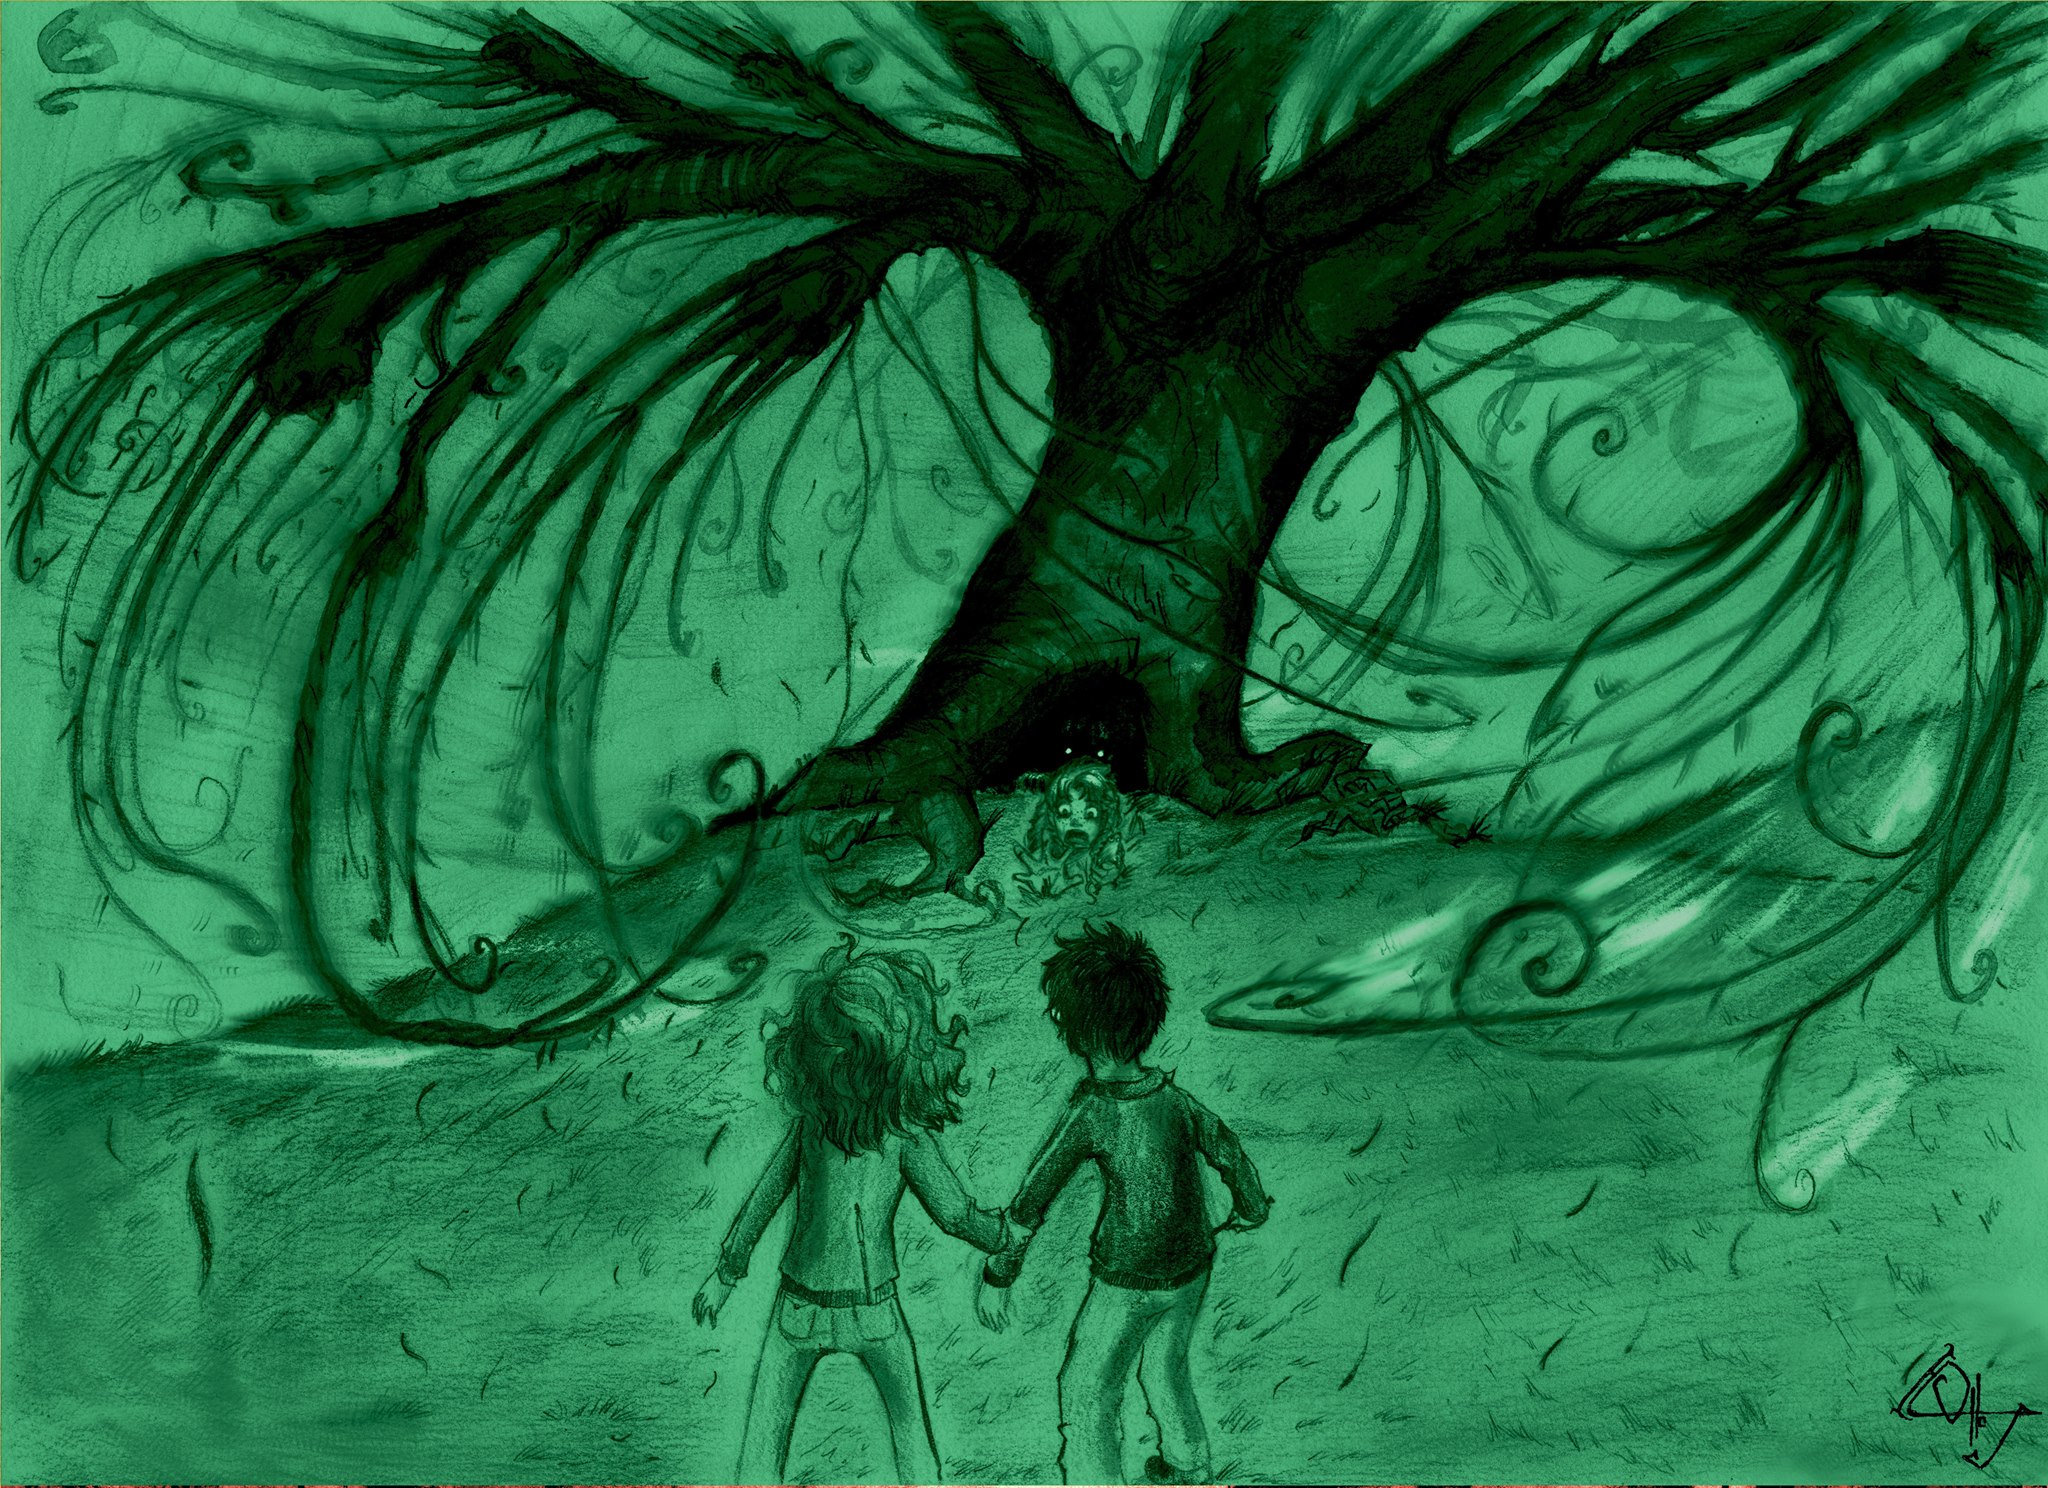 The Whomping Willow (part 2)